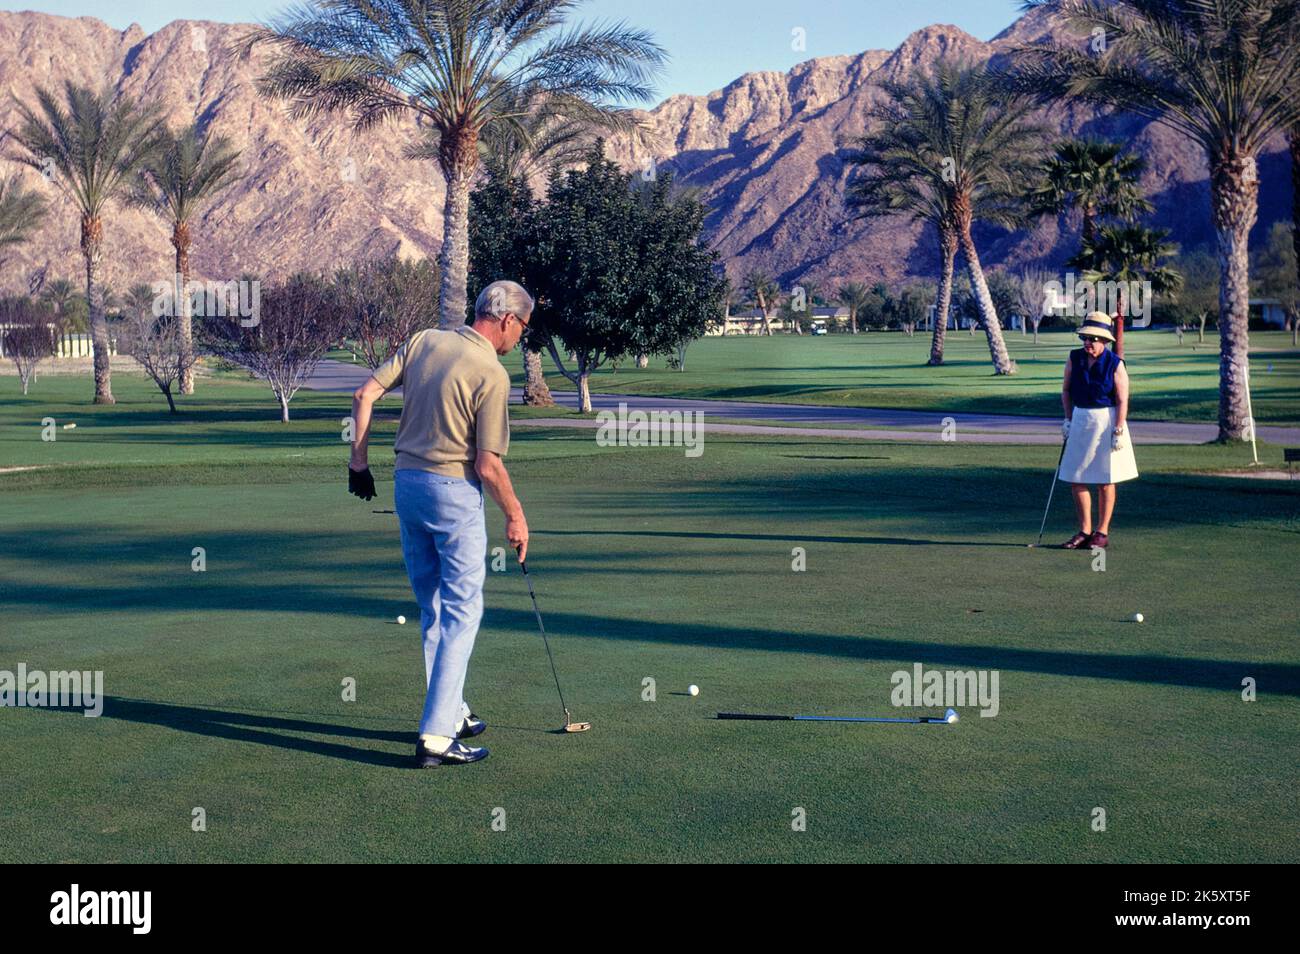 Hombre y mujer en Putting Green, Palm Desert, California, EE.UU., Toni Frissell Collection, Marzo 1969 Foto de stock